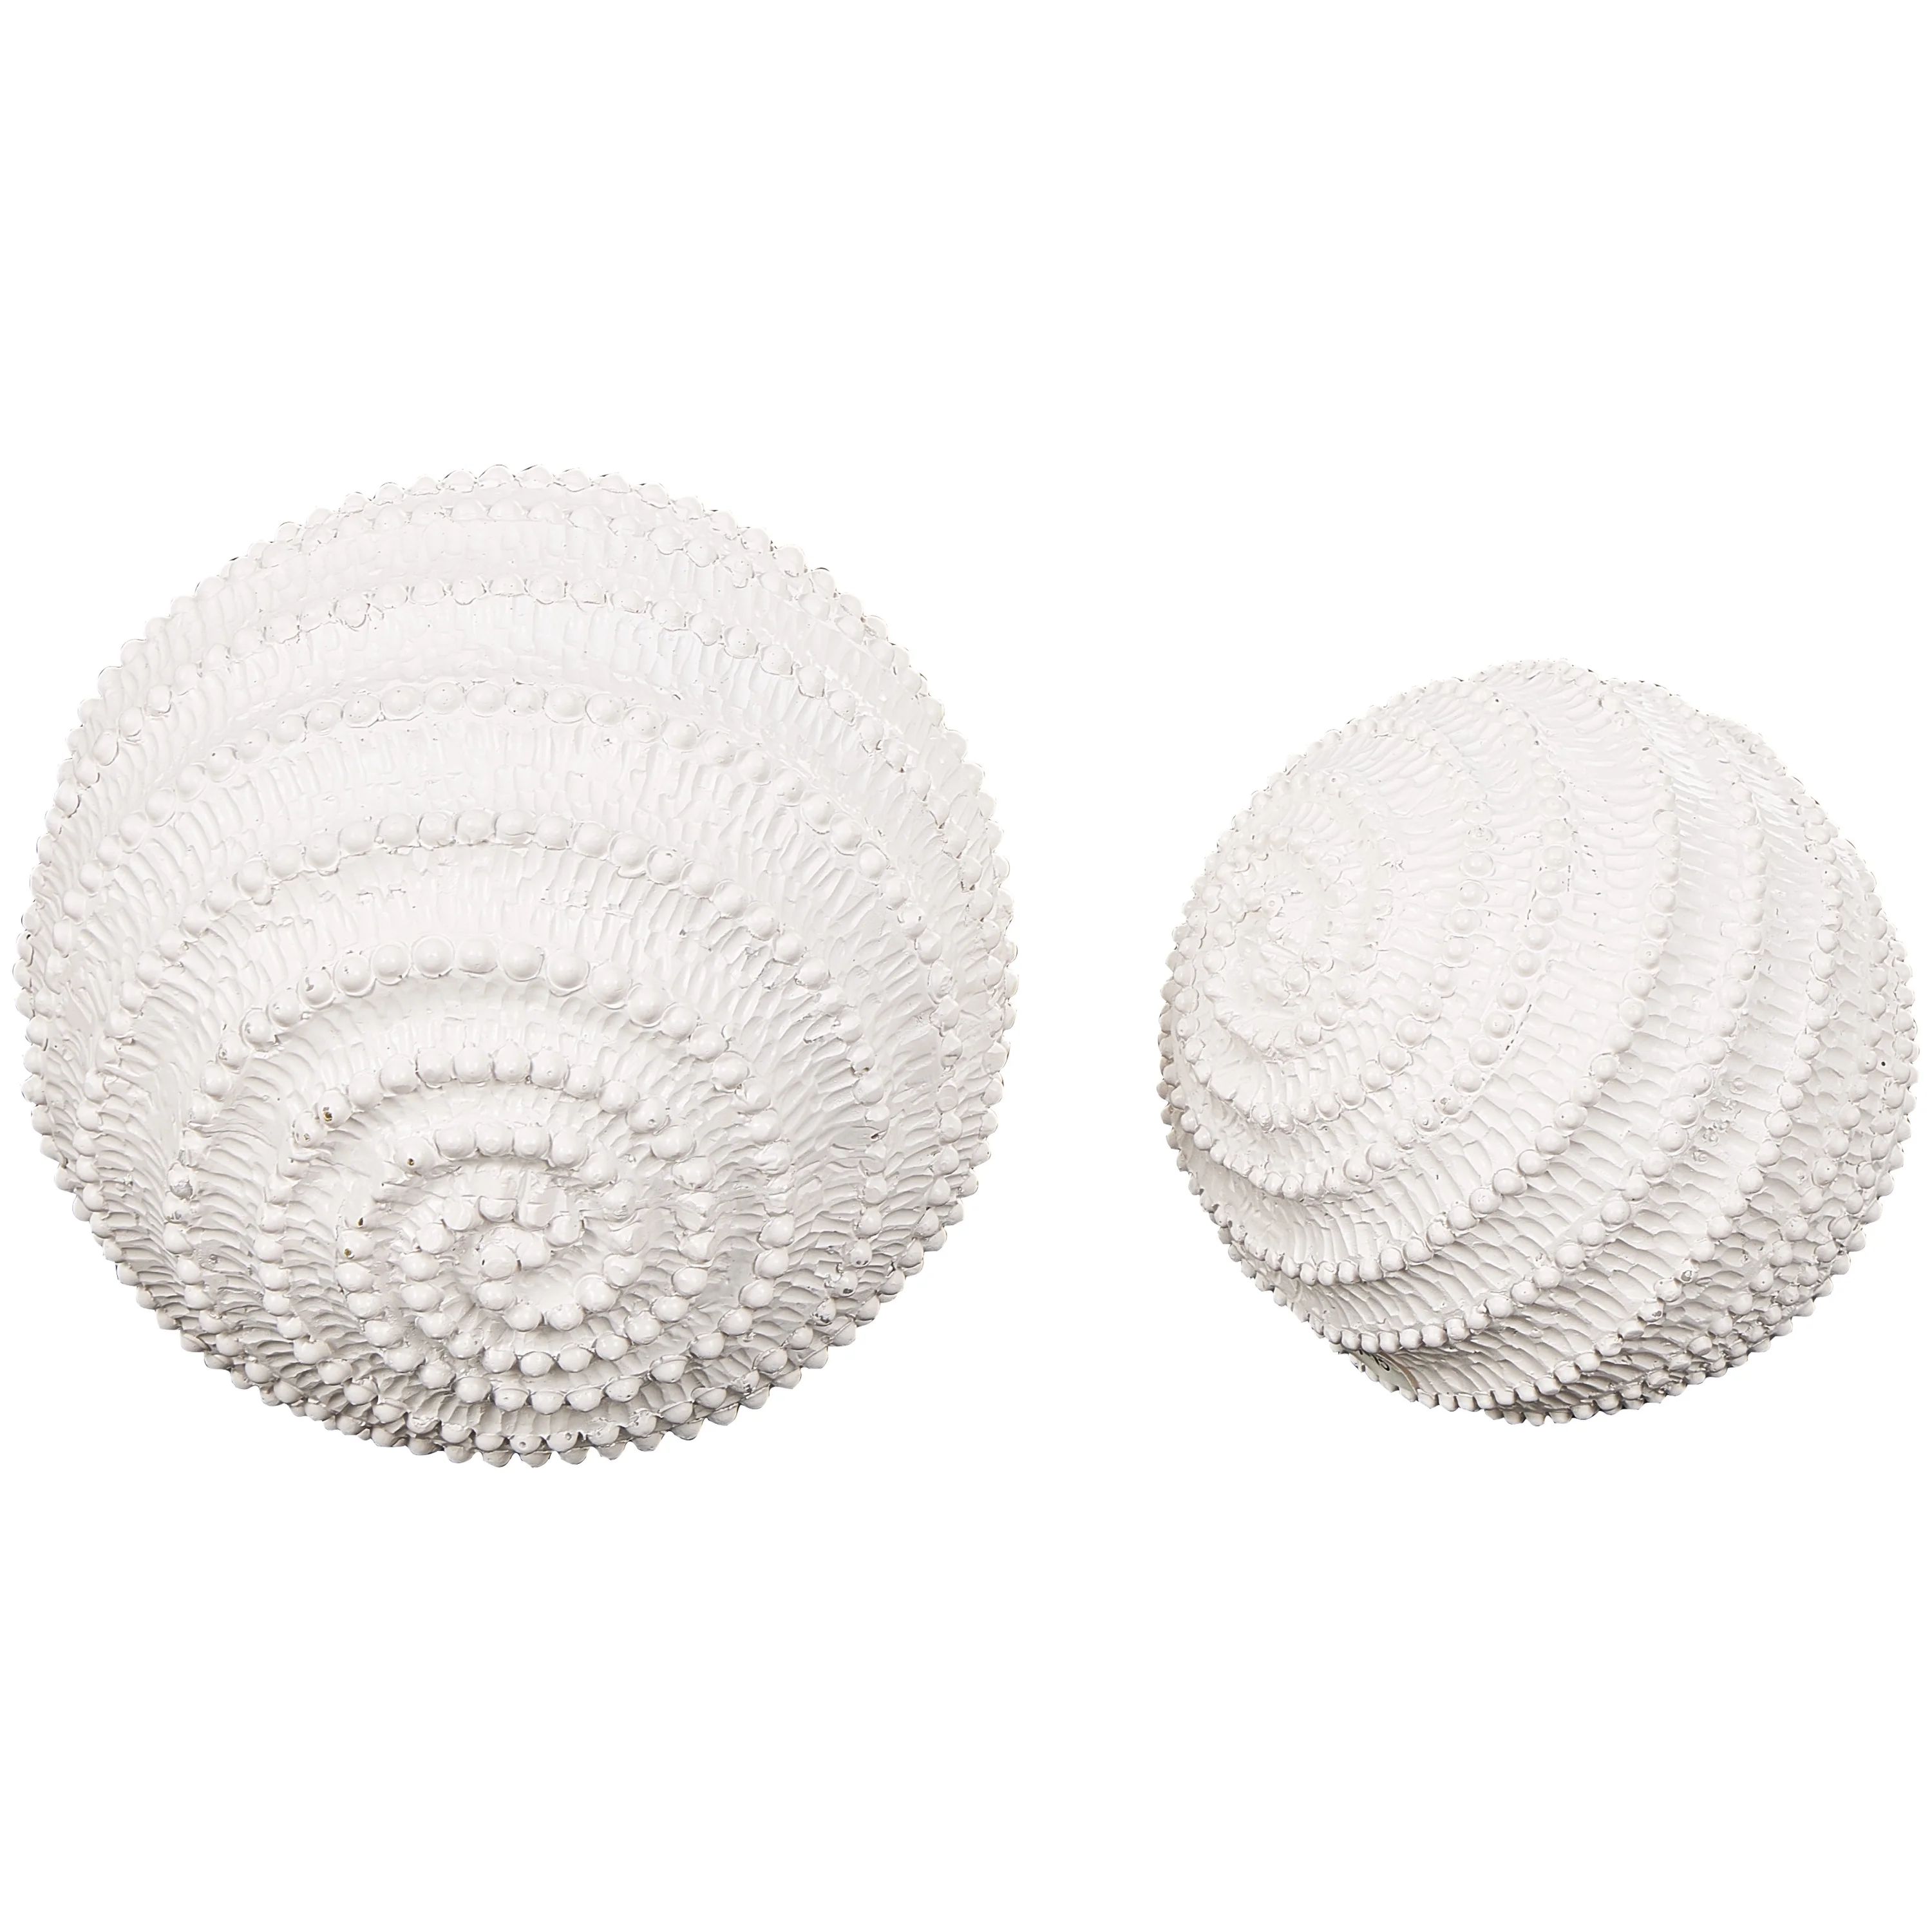 6", 5"H Cream Resin Textured Coral Sculpture with Dimensional Ball Details, by DecMode (2 Count) | Walmart (US)